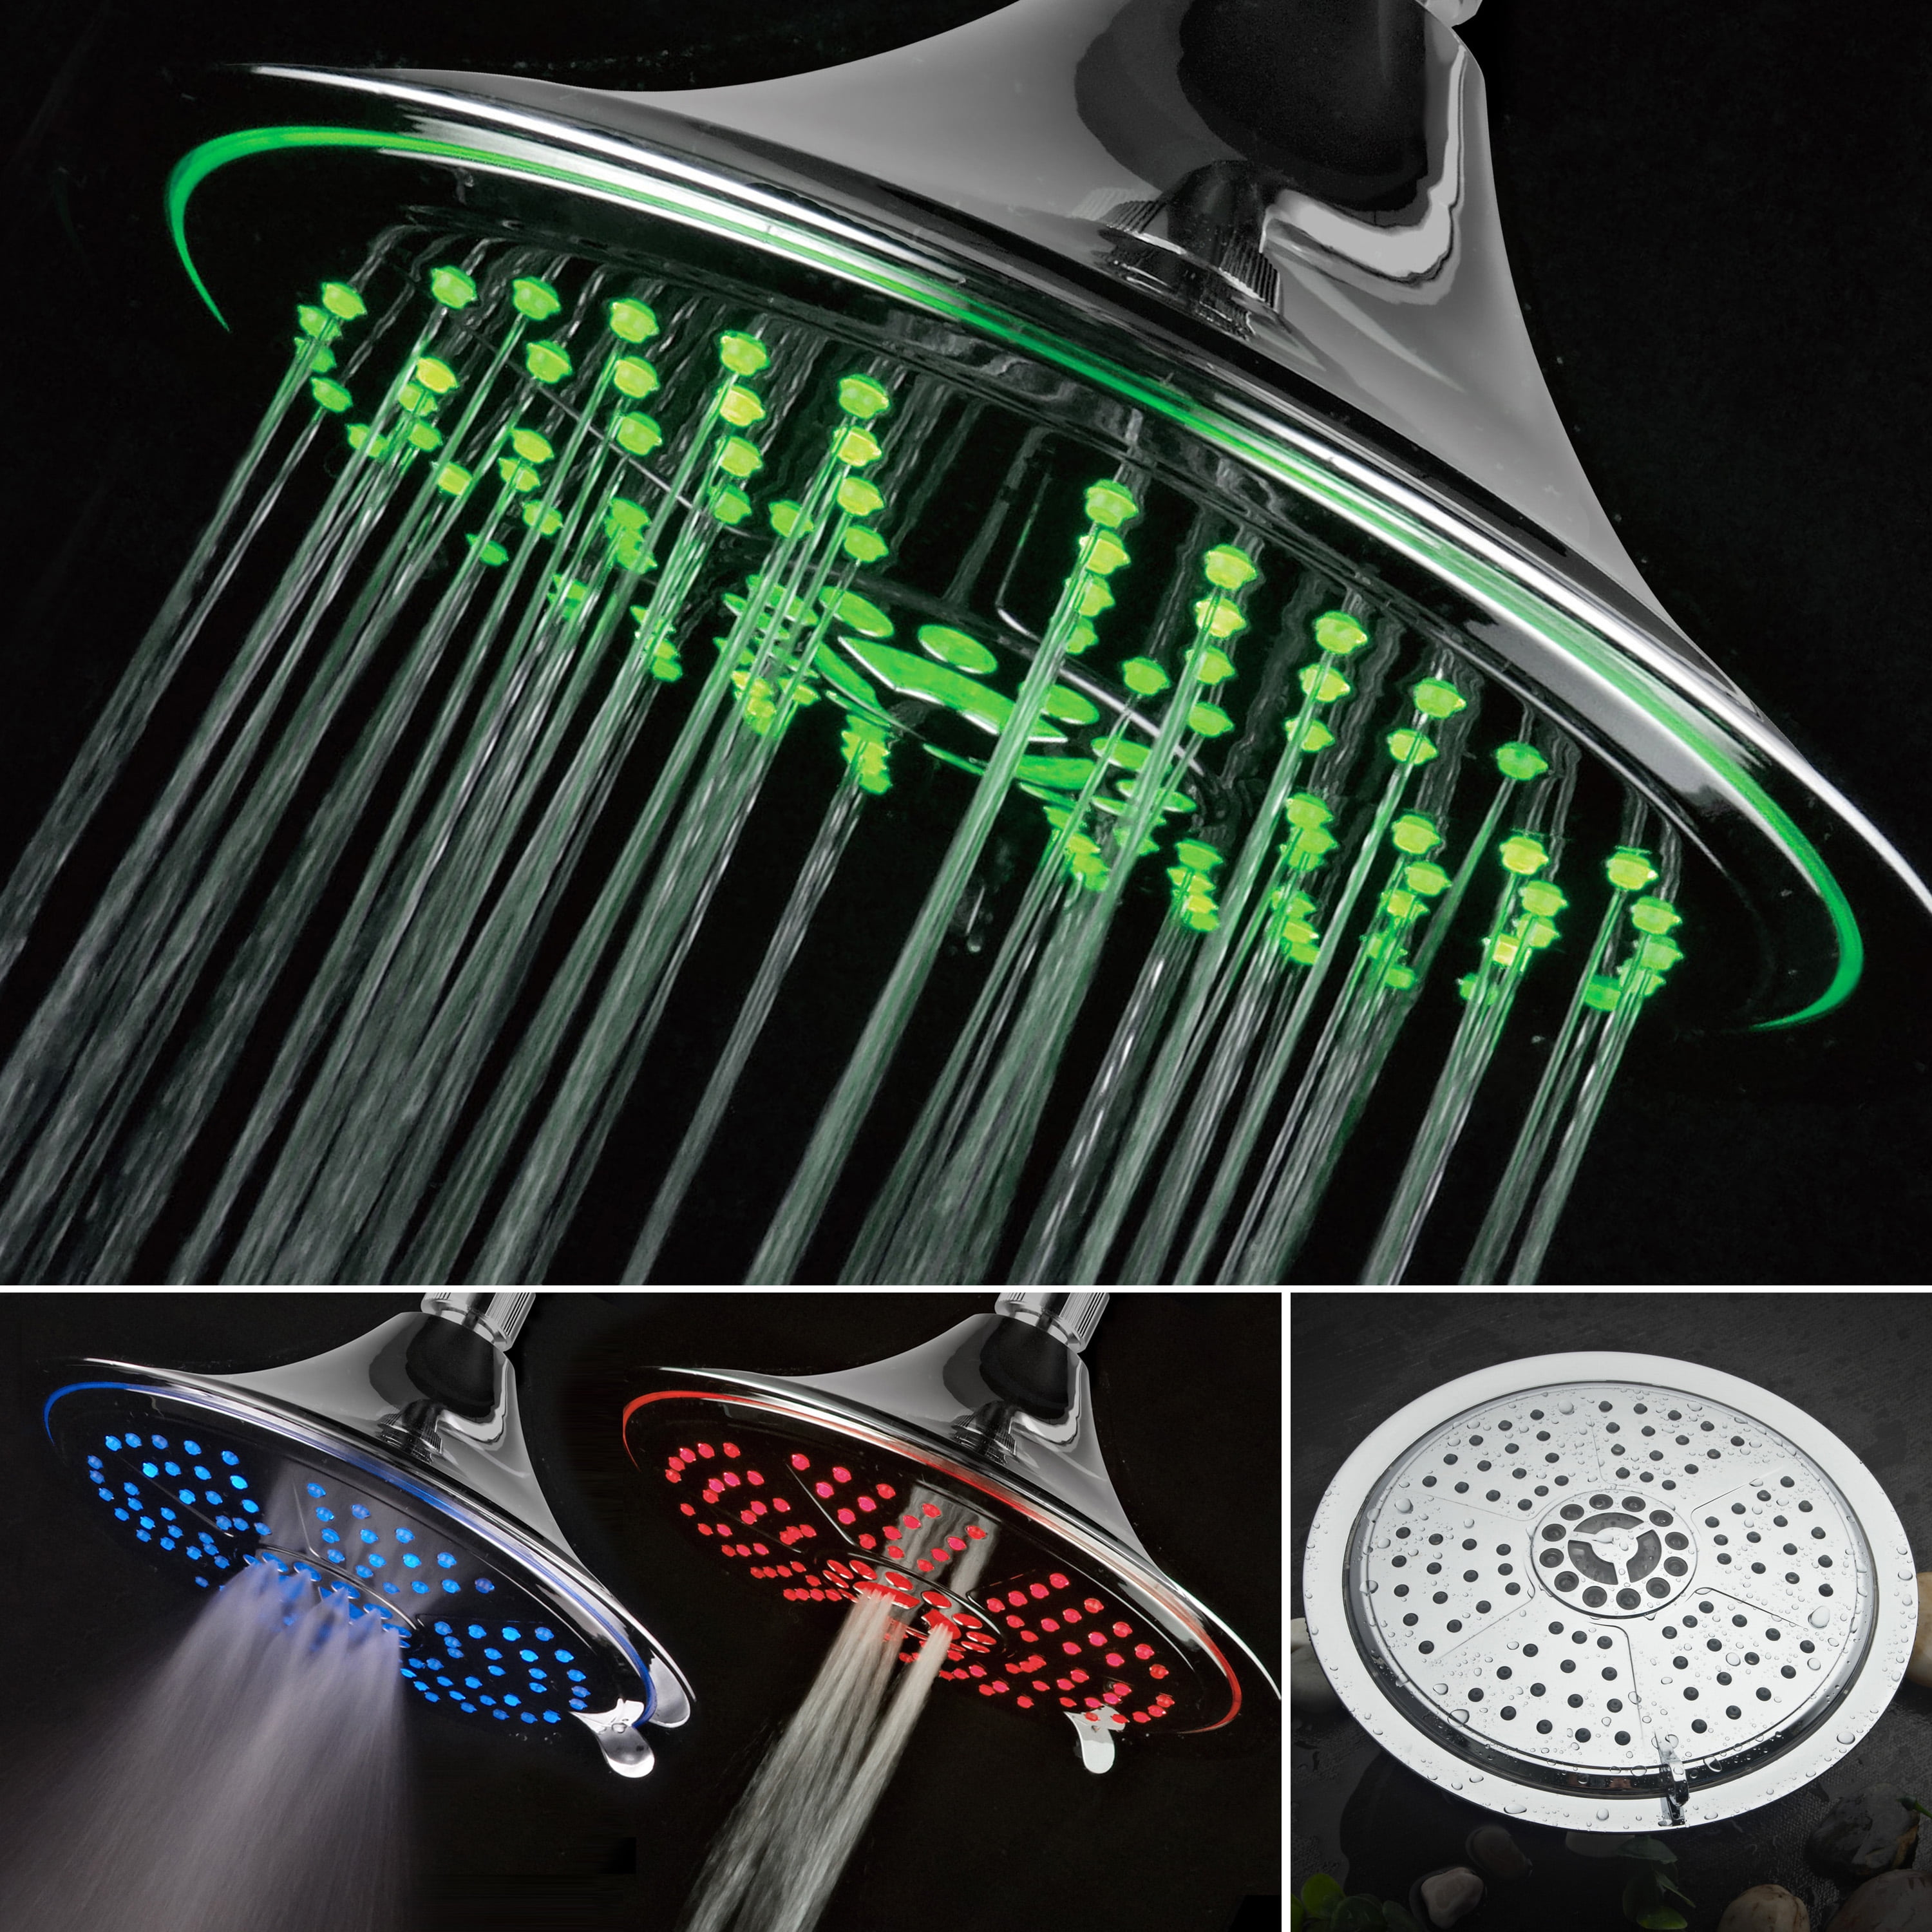 22-Inch Wall-Mount Matte Black Rainfall and Waterfall Shower Head with  3-Way Thermostatic Shower Faucet, Available with or without LED Light